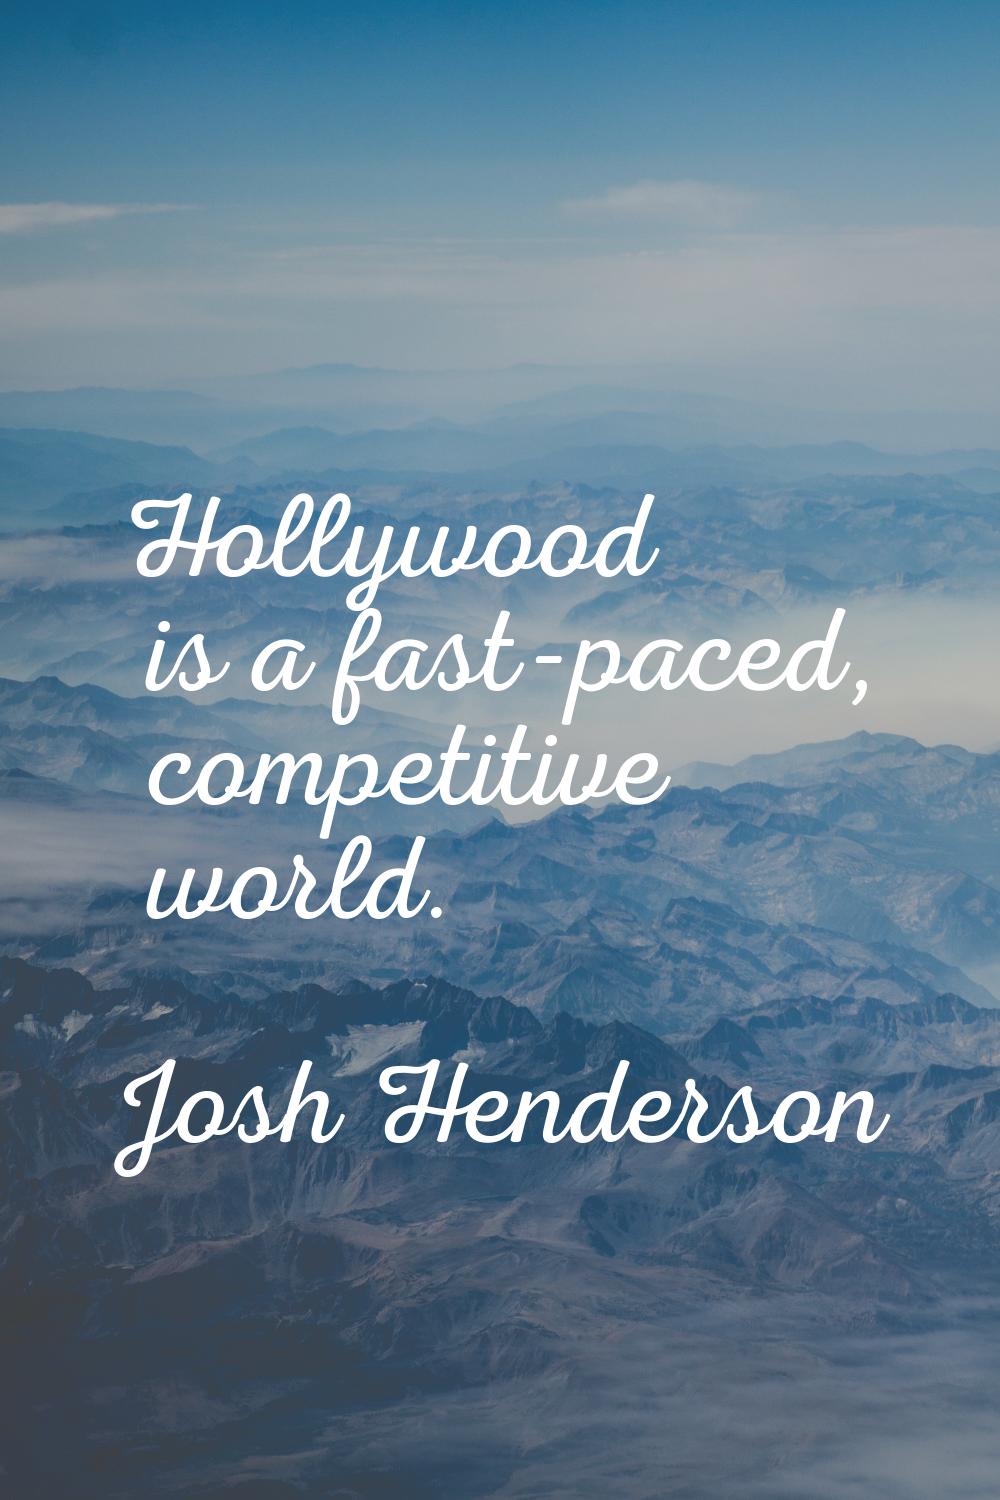 Hollywood is a fast-paced, competitive world.